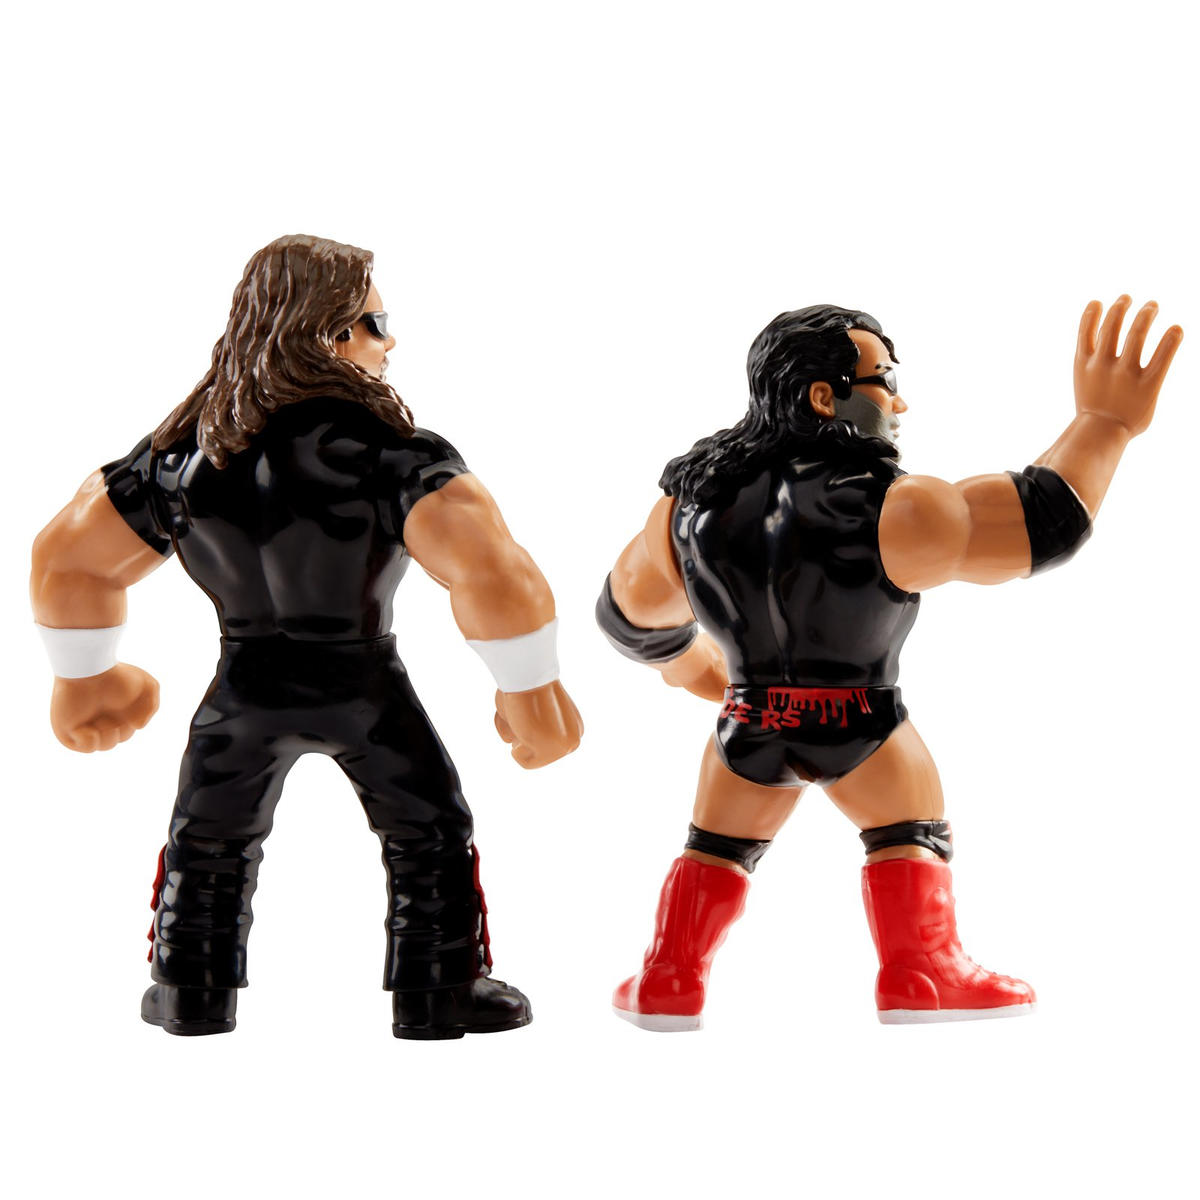 2023 WWE Mattel Ringside Exclusive nWo Official Retro Tag Team: Scott Hall & Kevin Nash